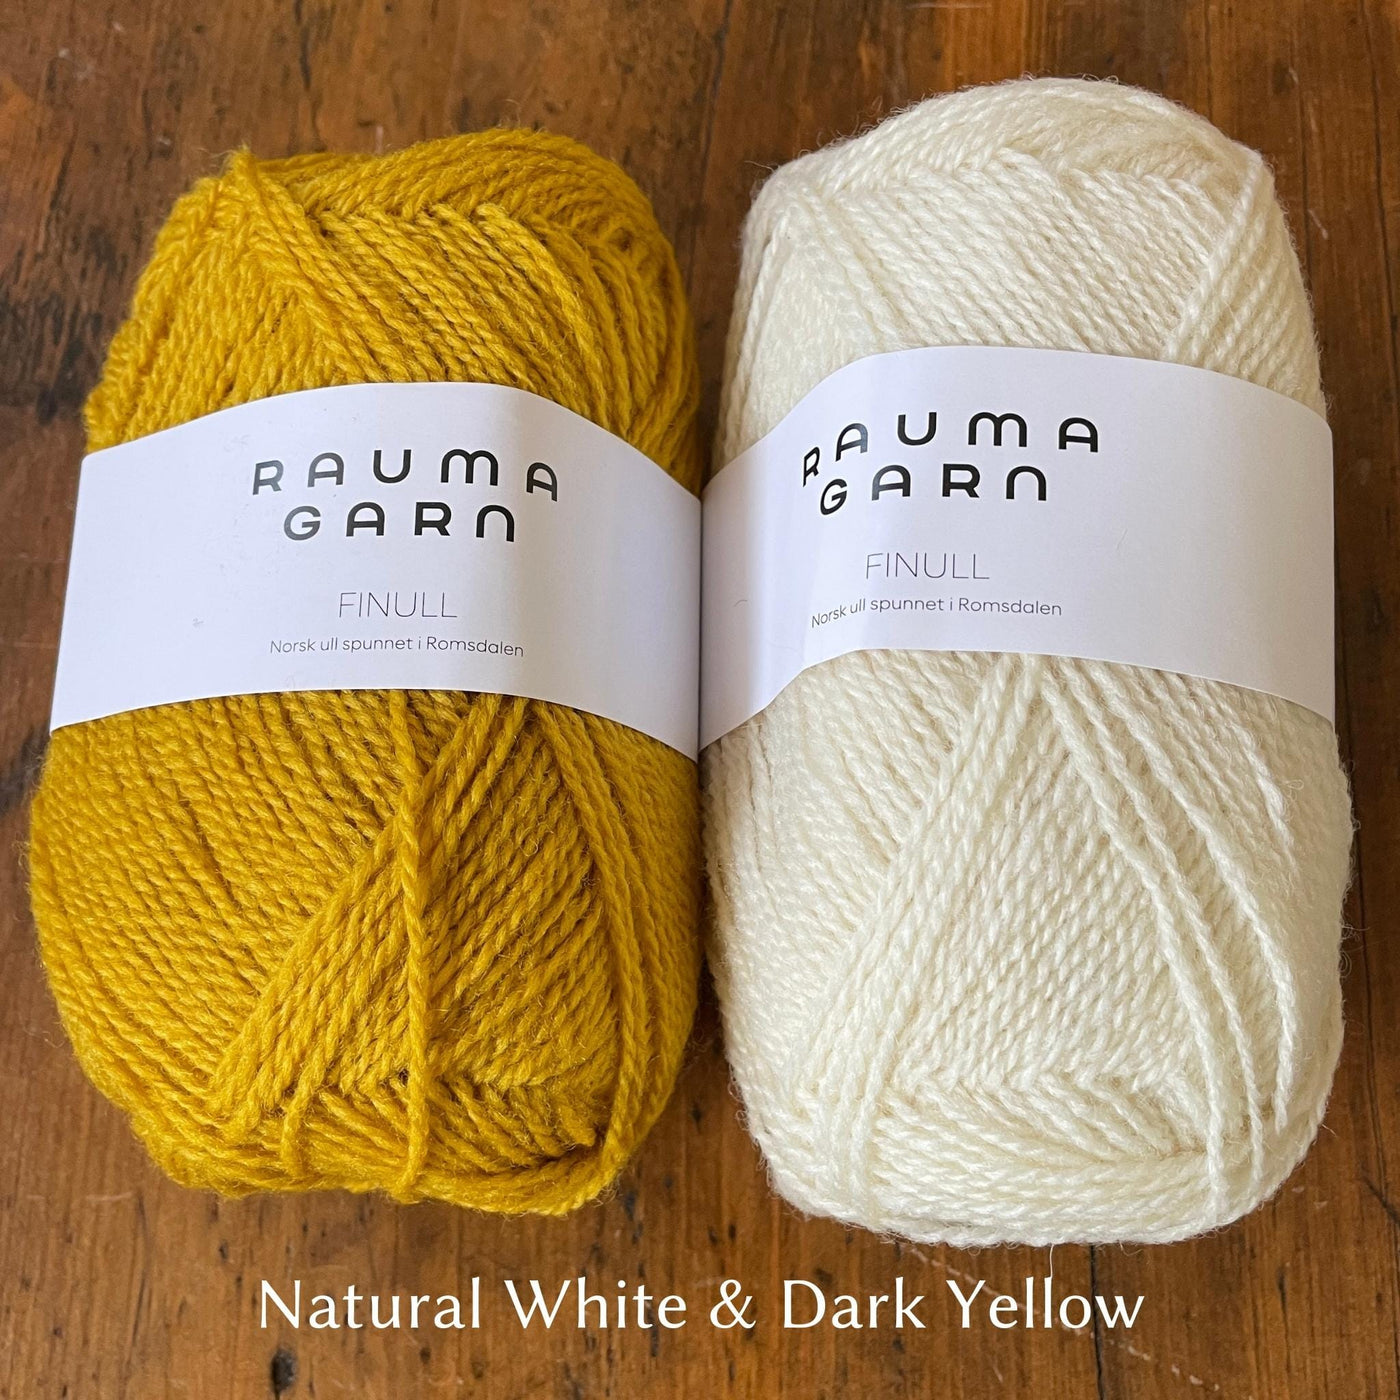 Two balls of Finullgarn yarn; one dark yellow, one natural white color